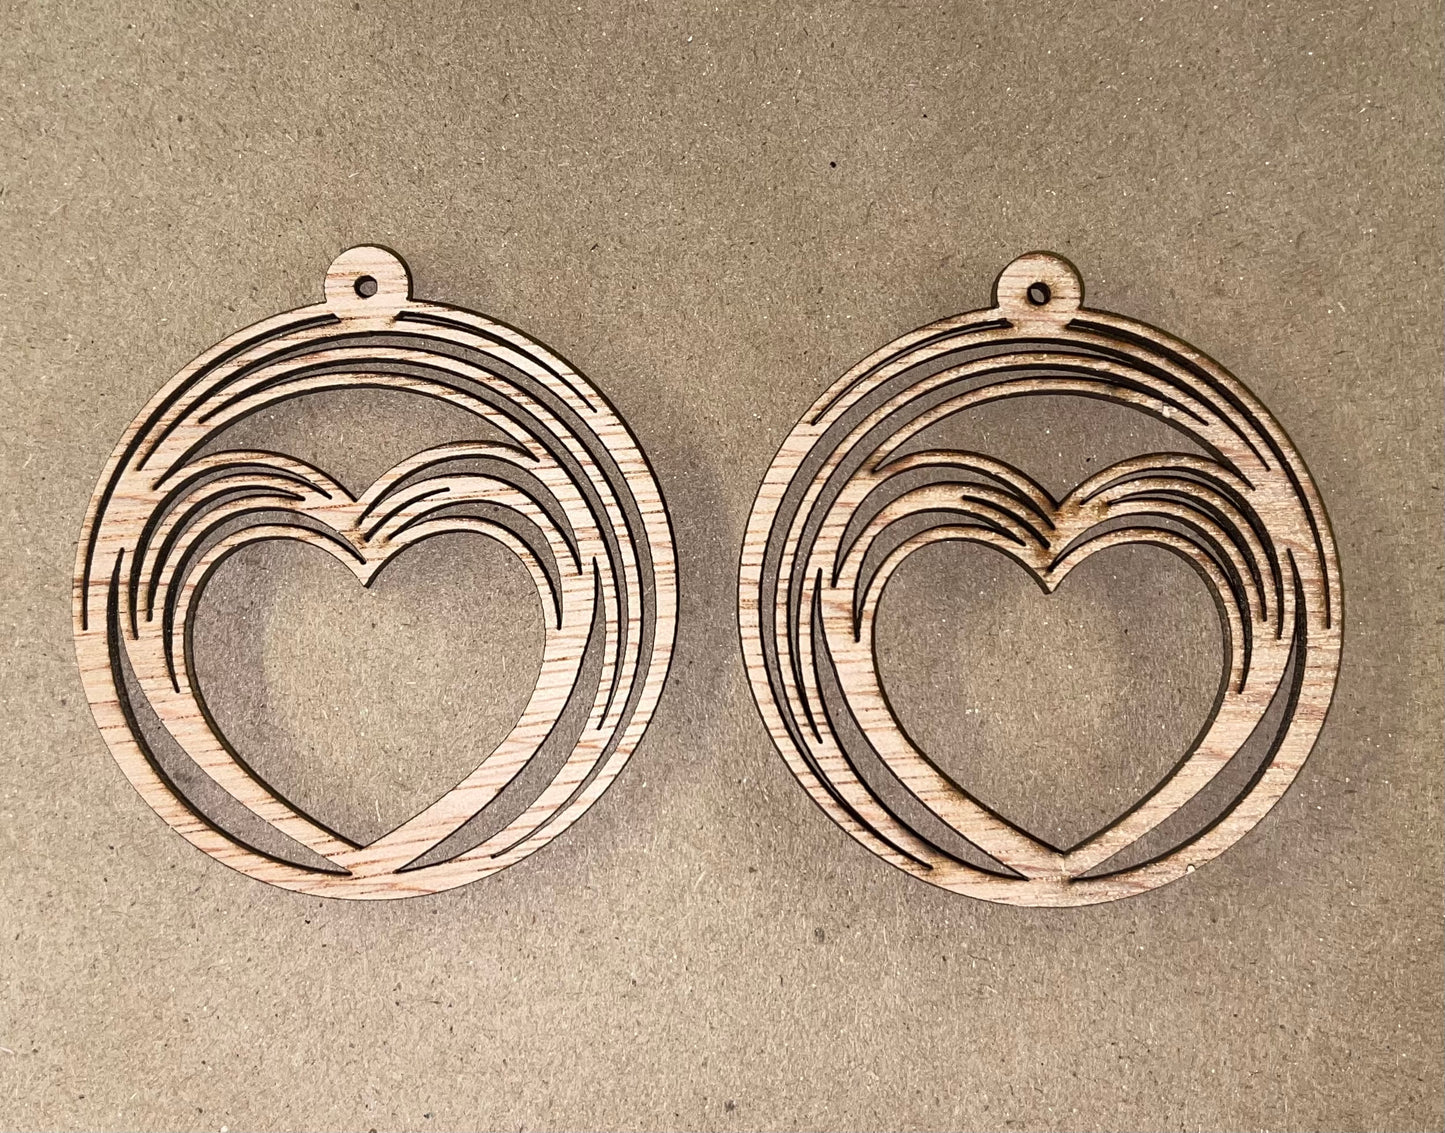 Sketchy Round Heart Outline Blank Wood Earrings. DIY jewelry. Unfinished laser cut wood jewelry. Wood earring blanks. Unfinished wood earrings. Wood jewelry blanks.